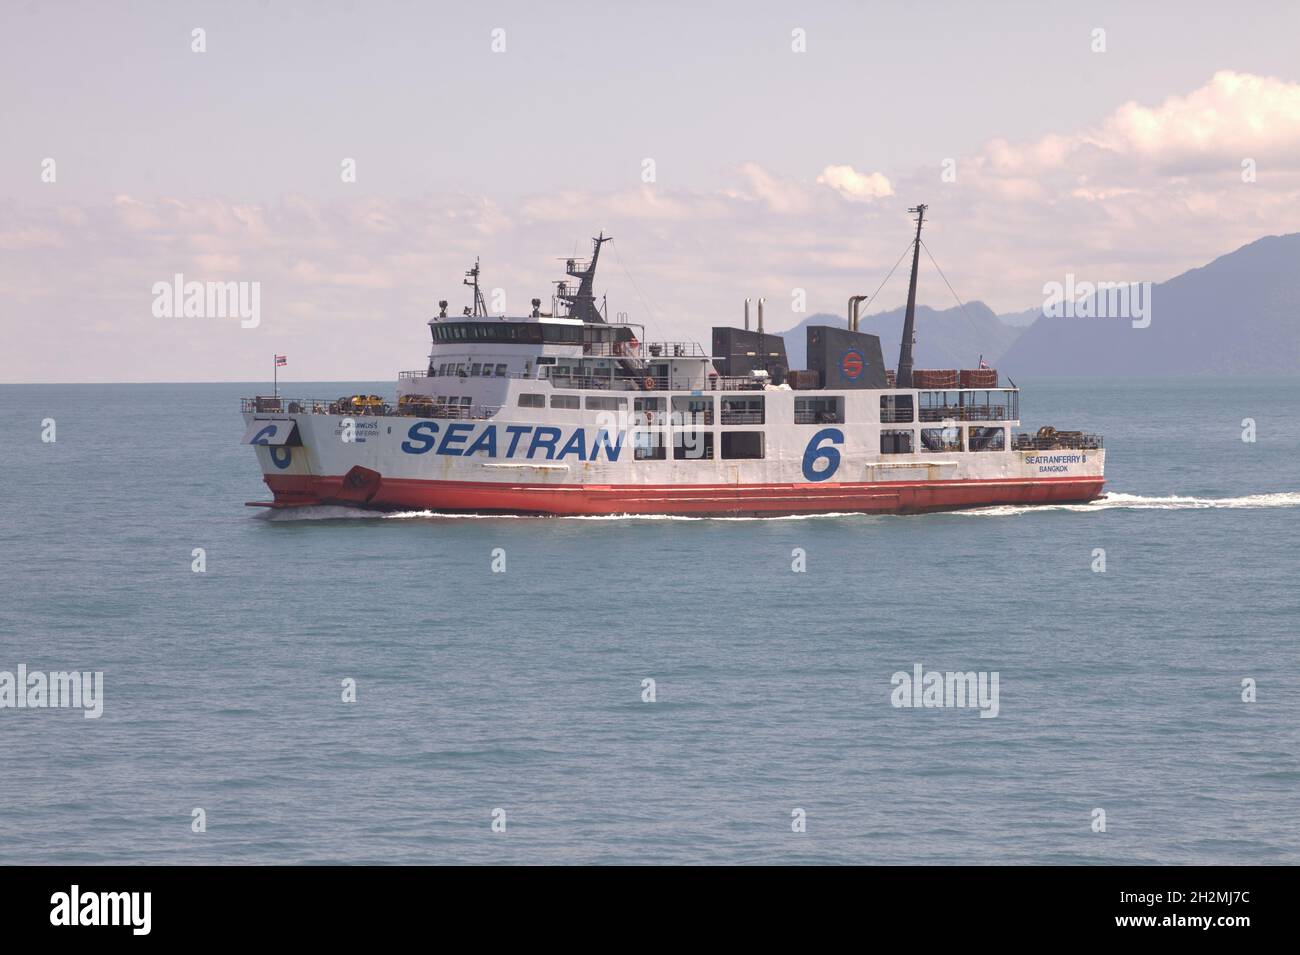 Seatran ferries on route between islands in Thailand Stock Photo